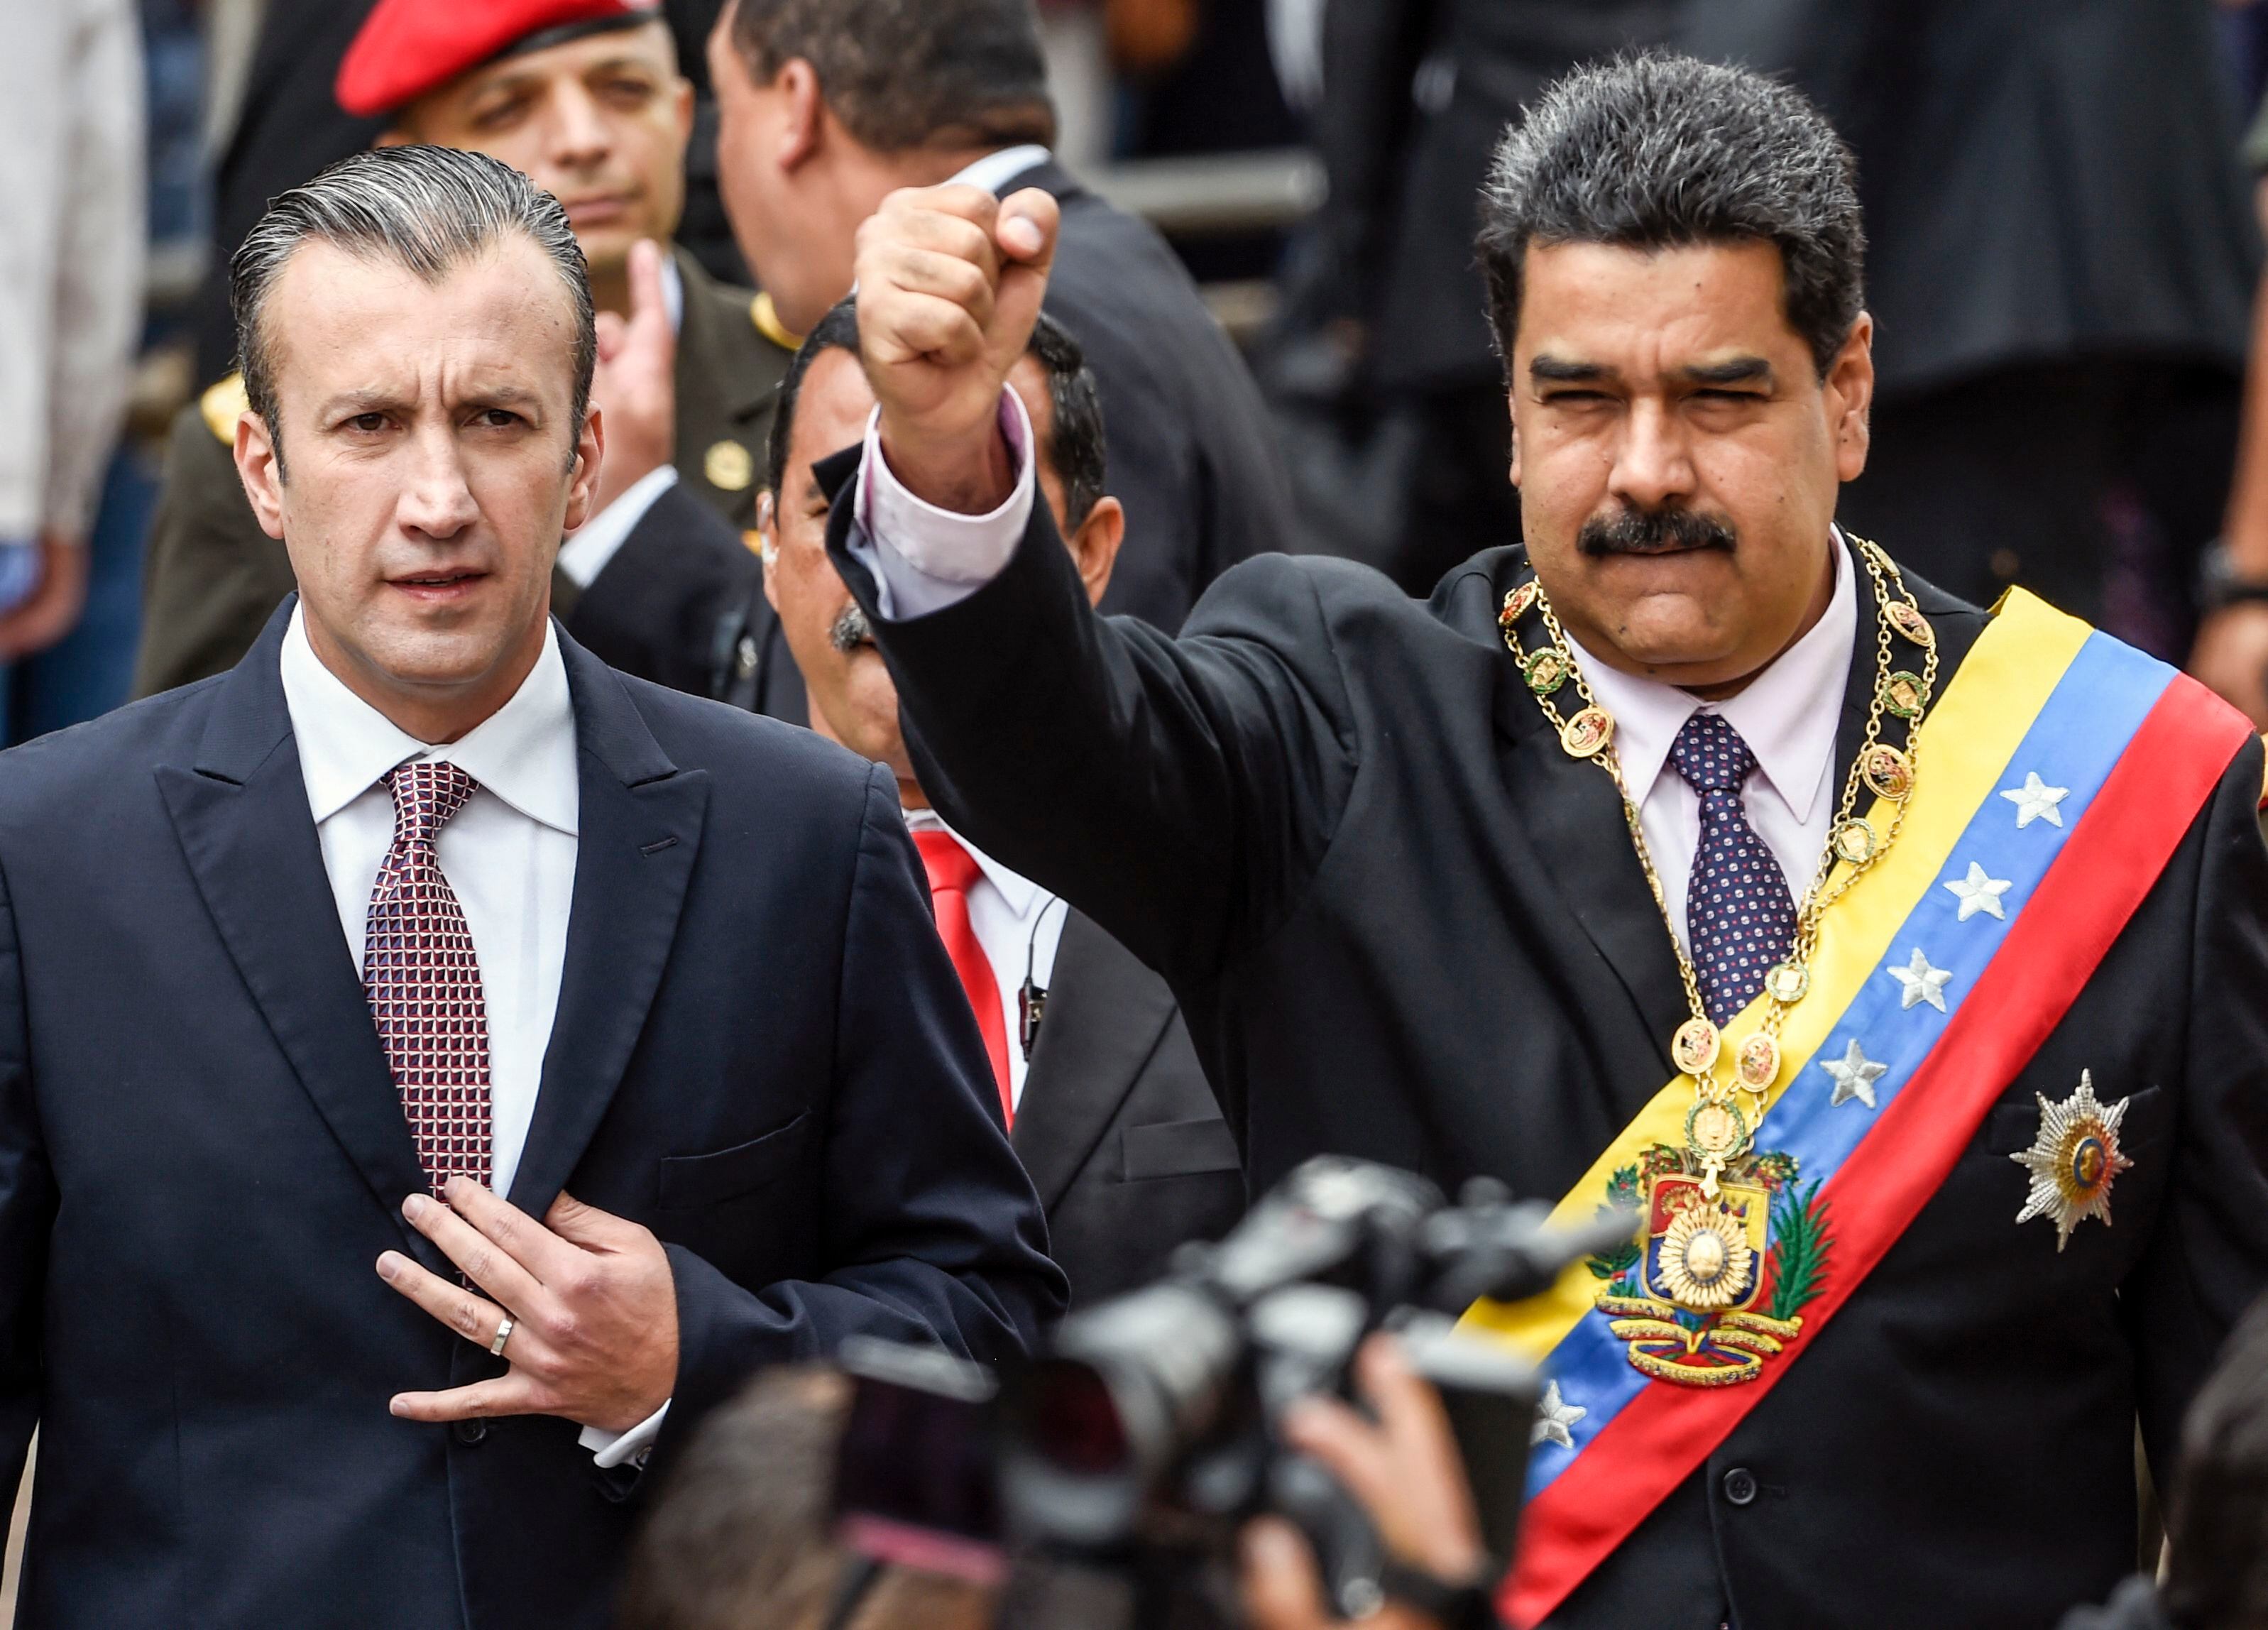 Venezuelan President Nicolás Maduro (right) and Vice President Tareck El Aissami greet their supporters in Caracas on January 15, 2017. (Photo by JUAN BARRETO / AFP).